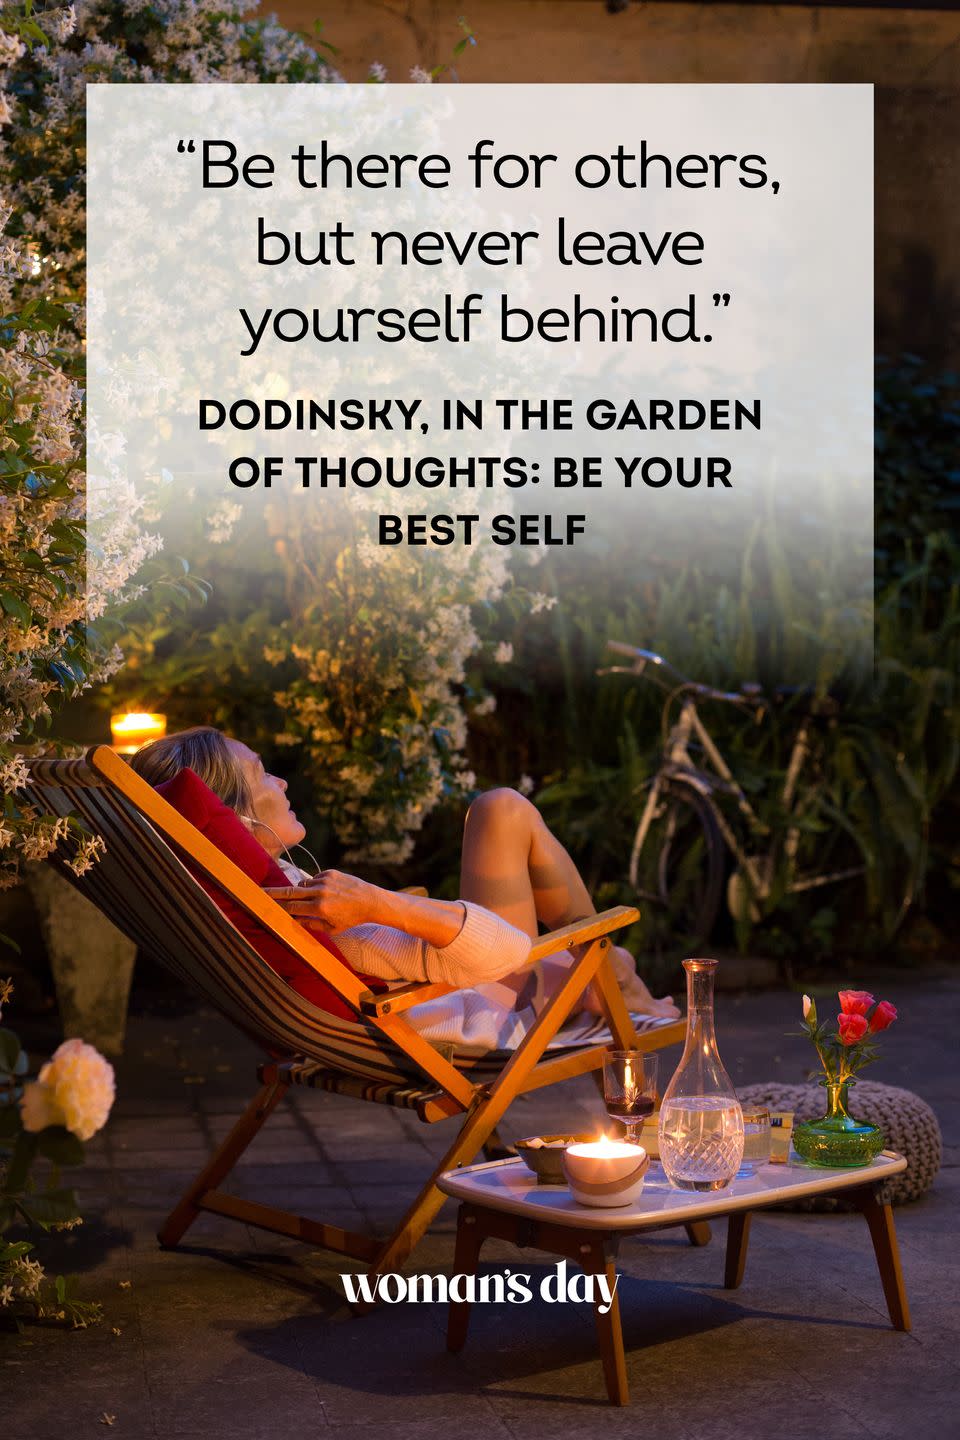 dodinsky in the garden of thoughts be your best self